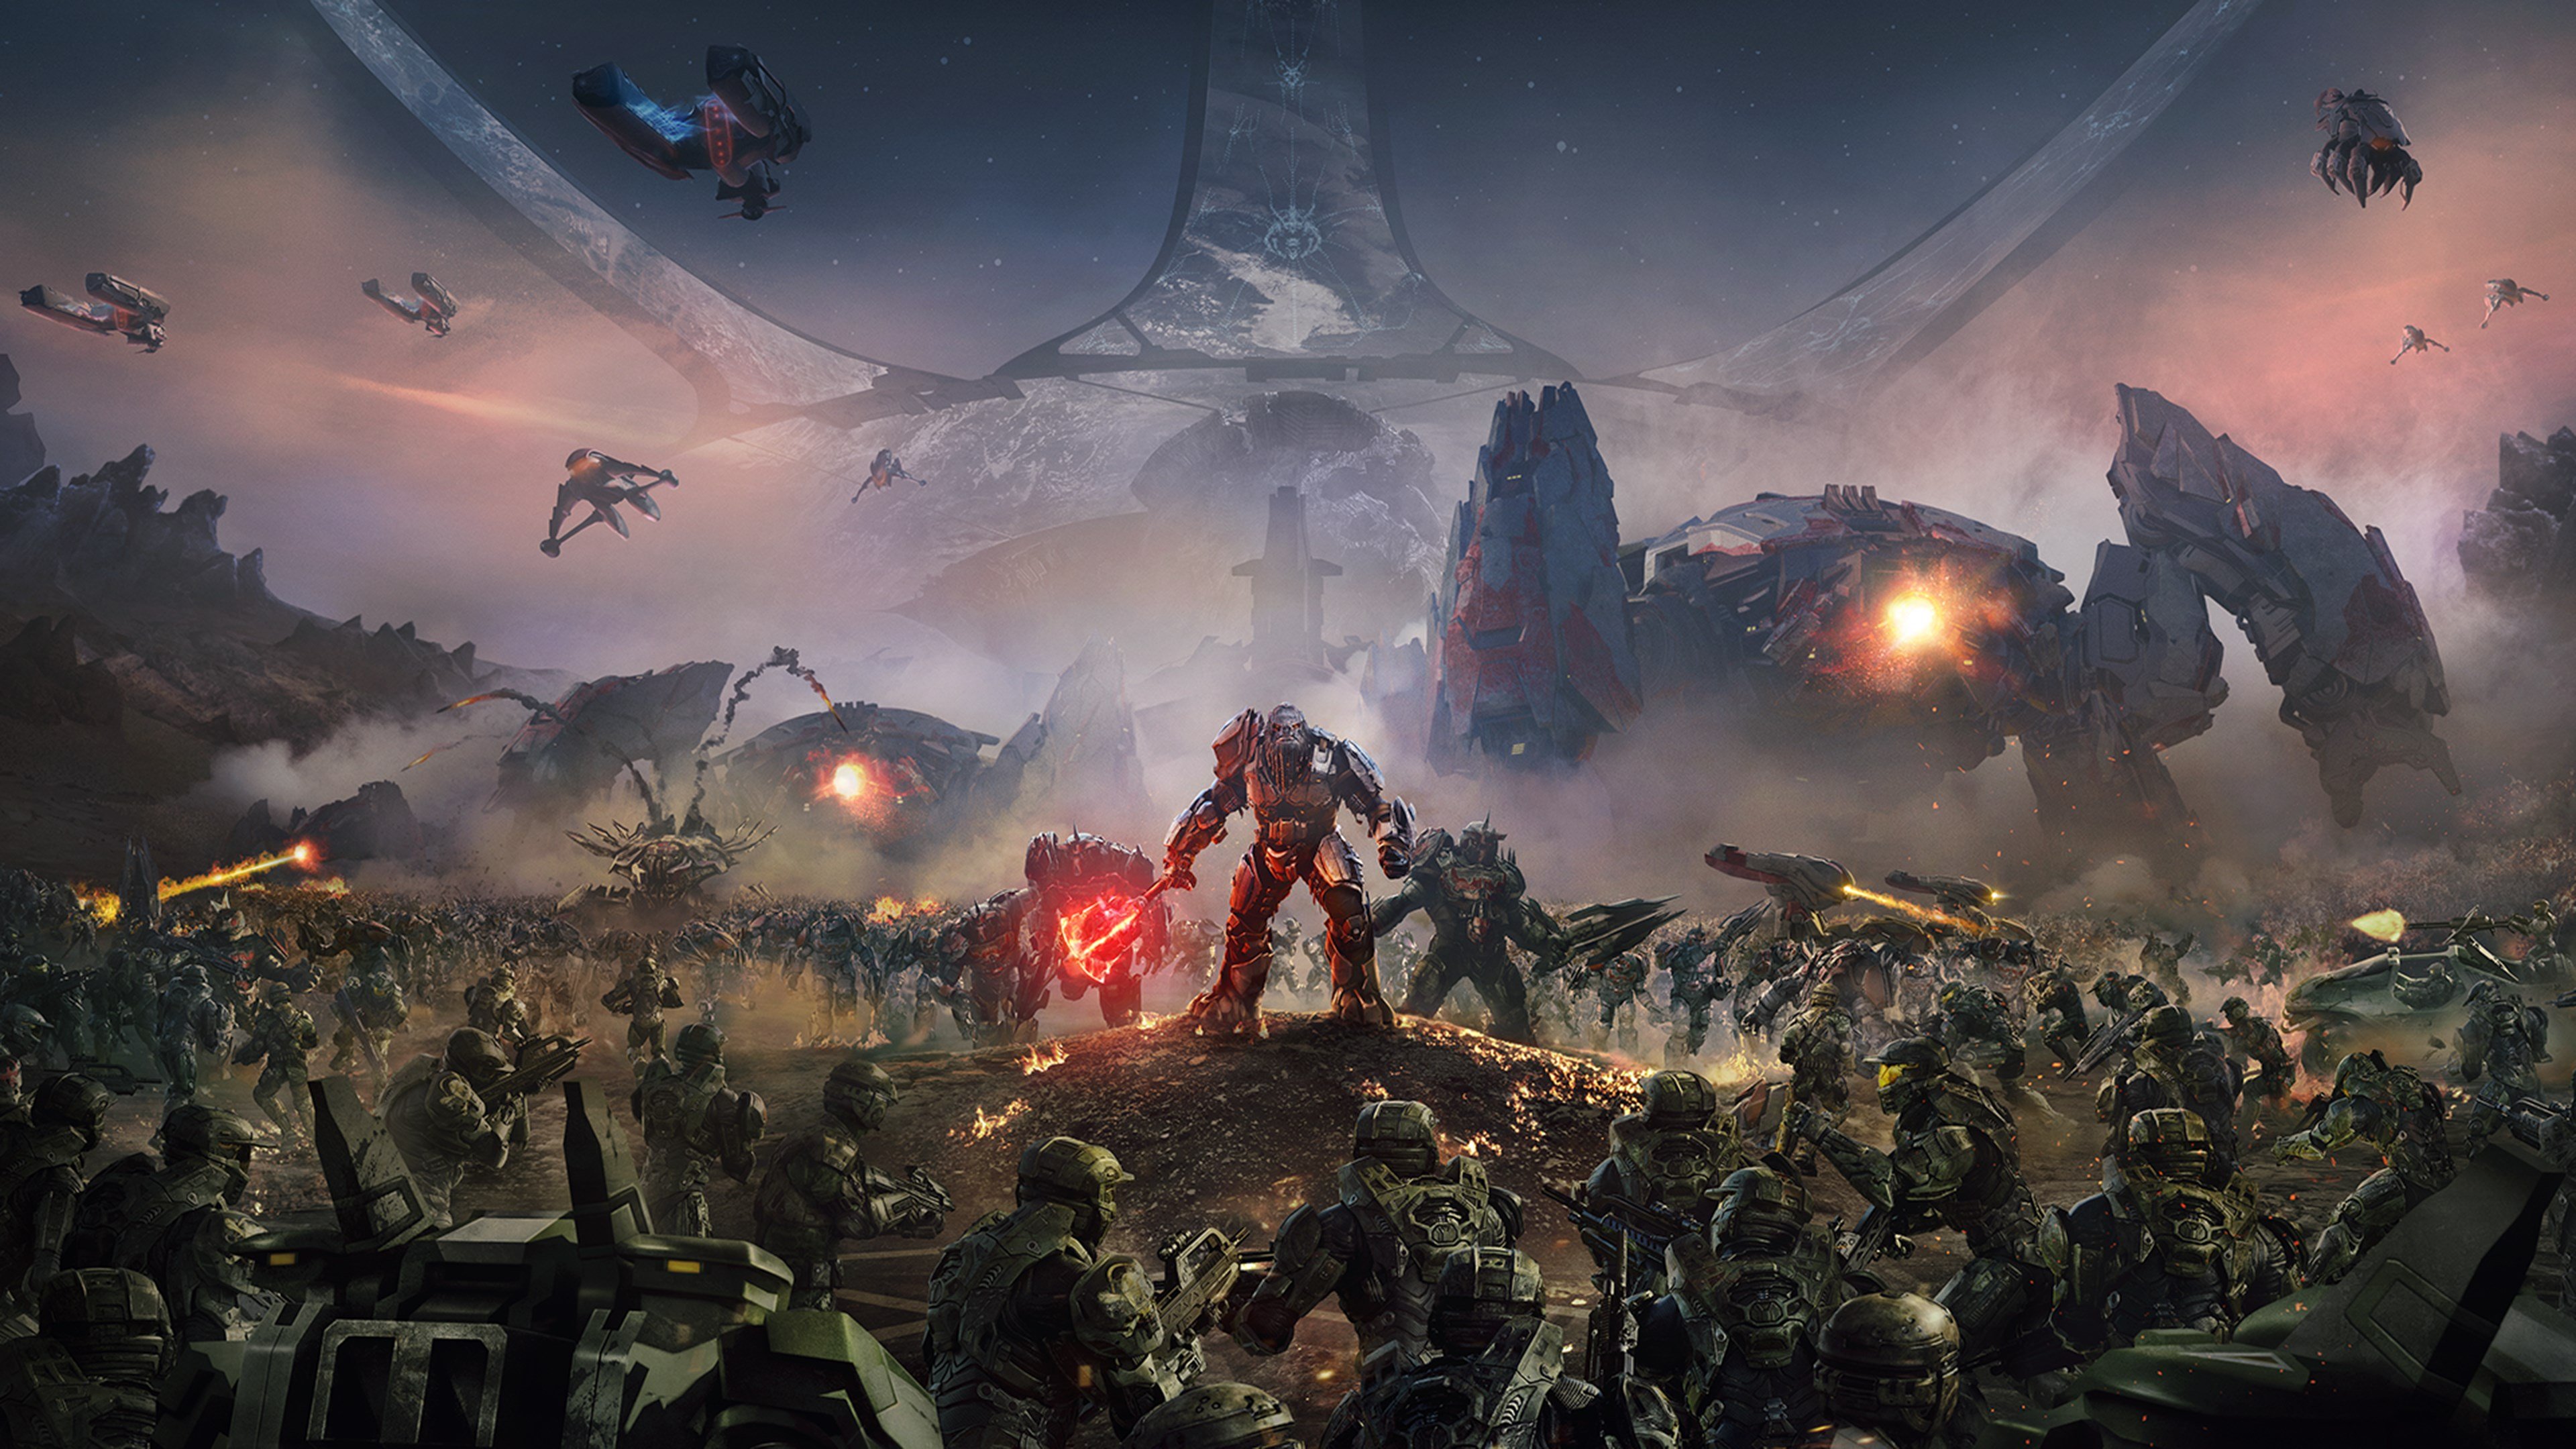 Halo Wars 2 cover image